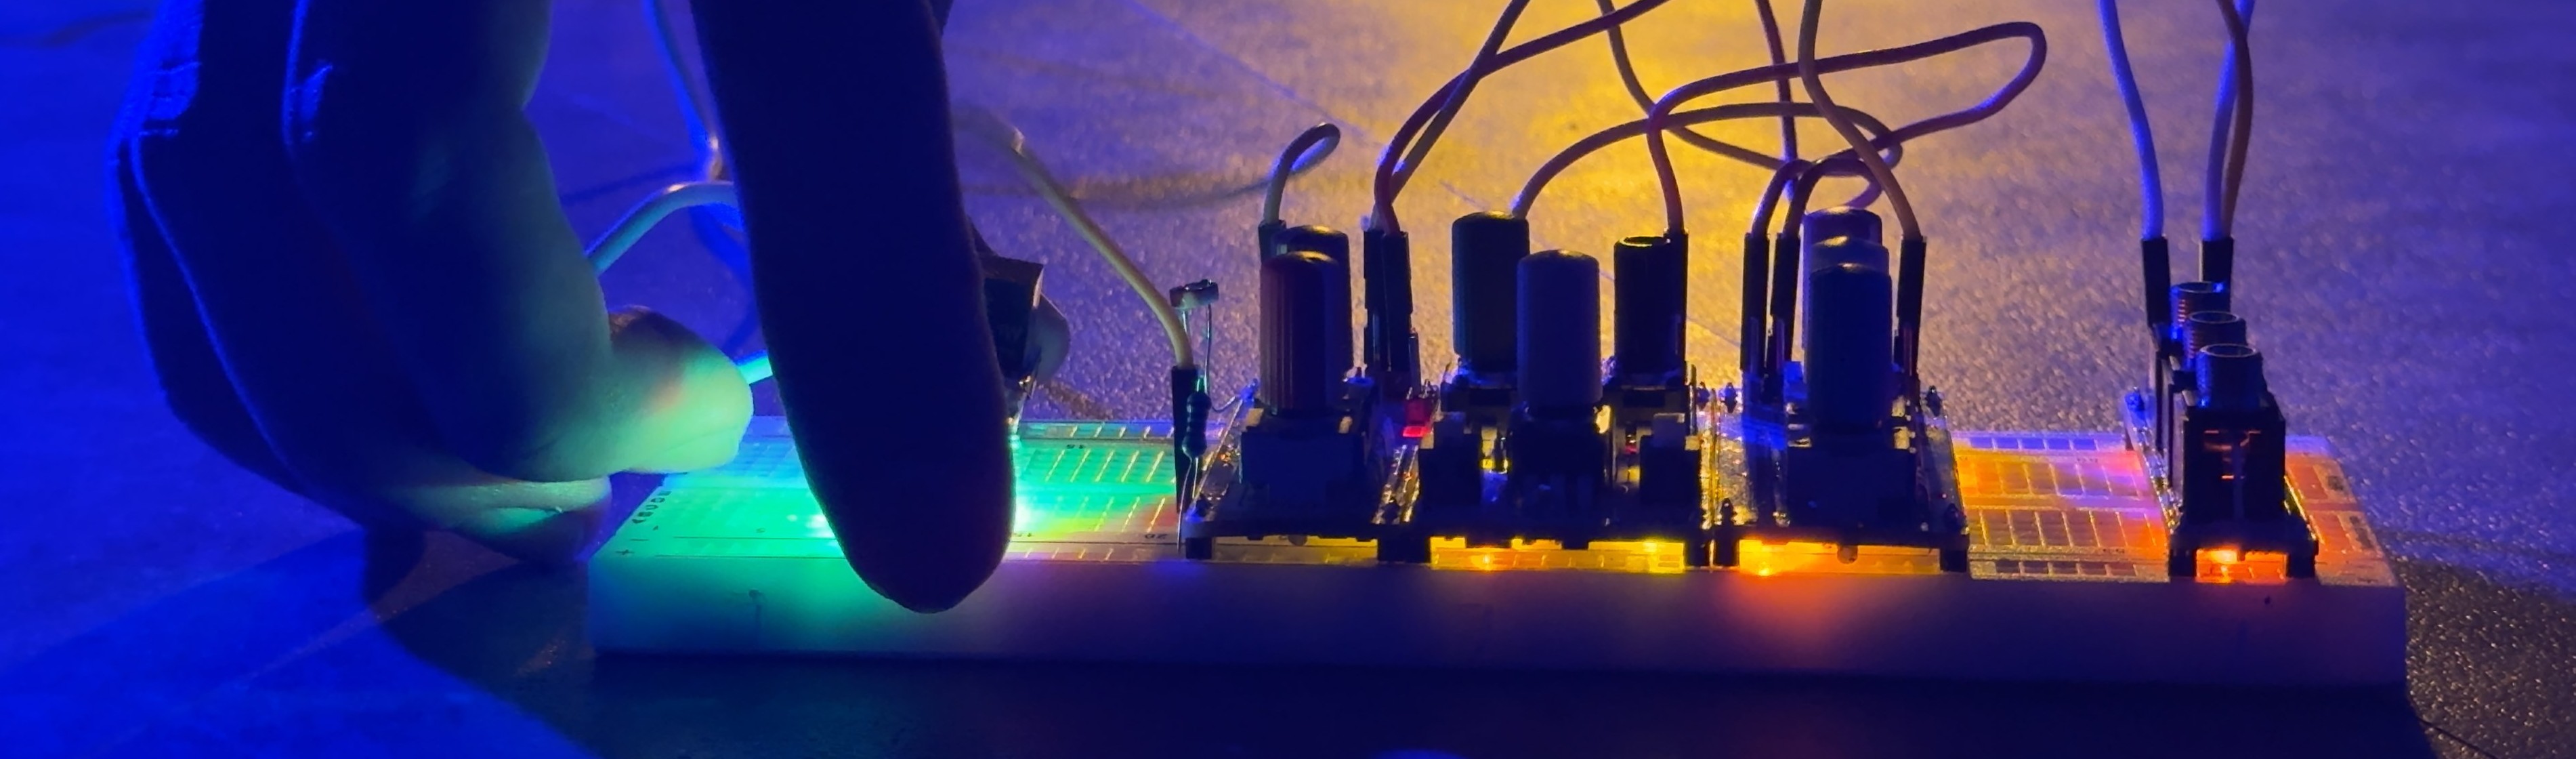 MICRORACK - The Most Portable Modular Synthesizer